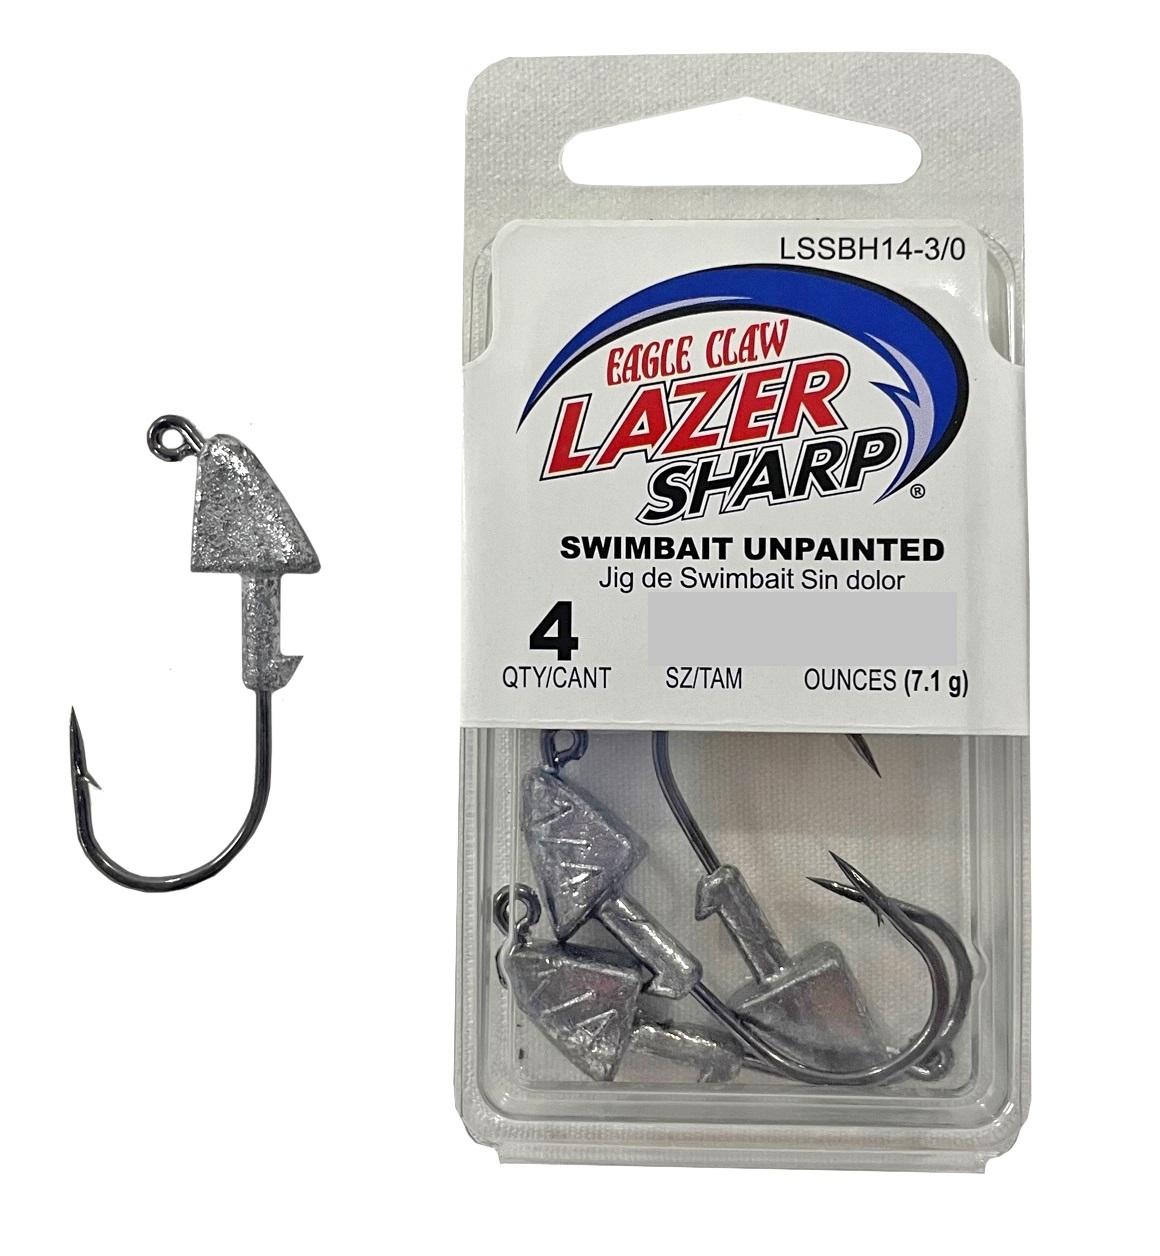 4 Pack of 1/4oz Unpainted Eagle Claw Lazer Sharp Swimbait Jig Heads